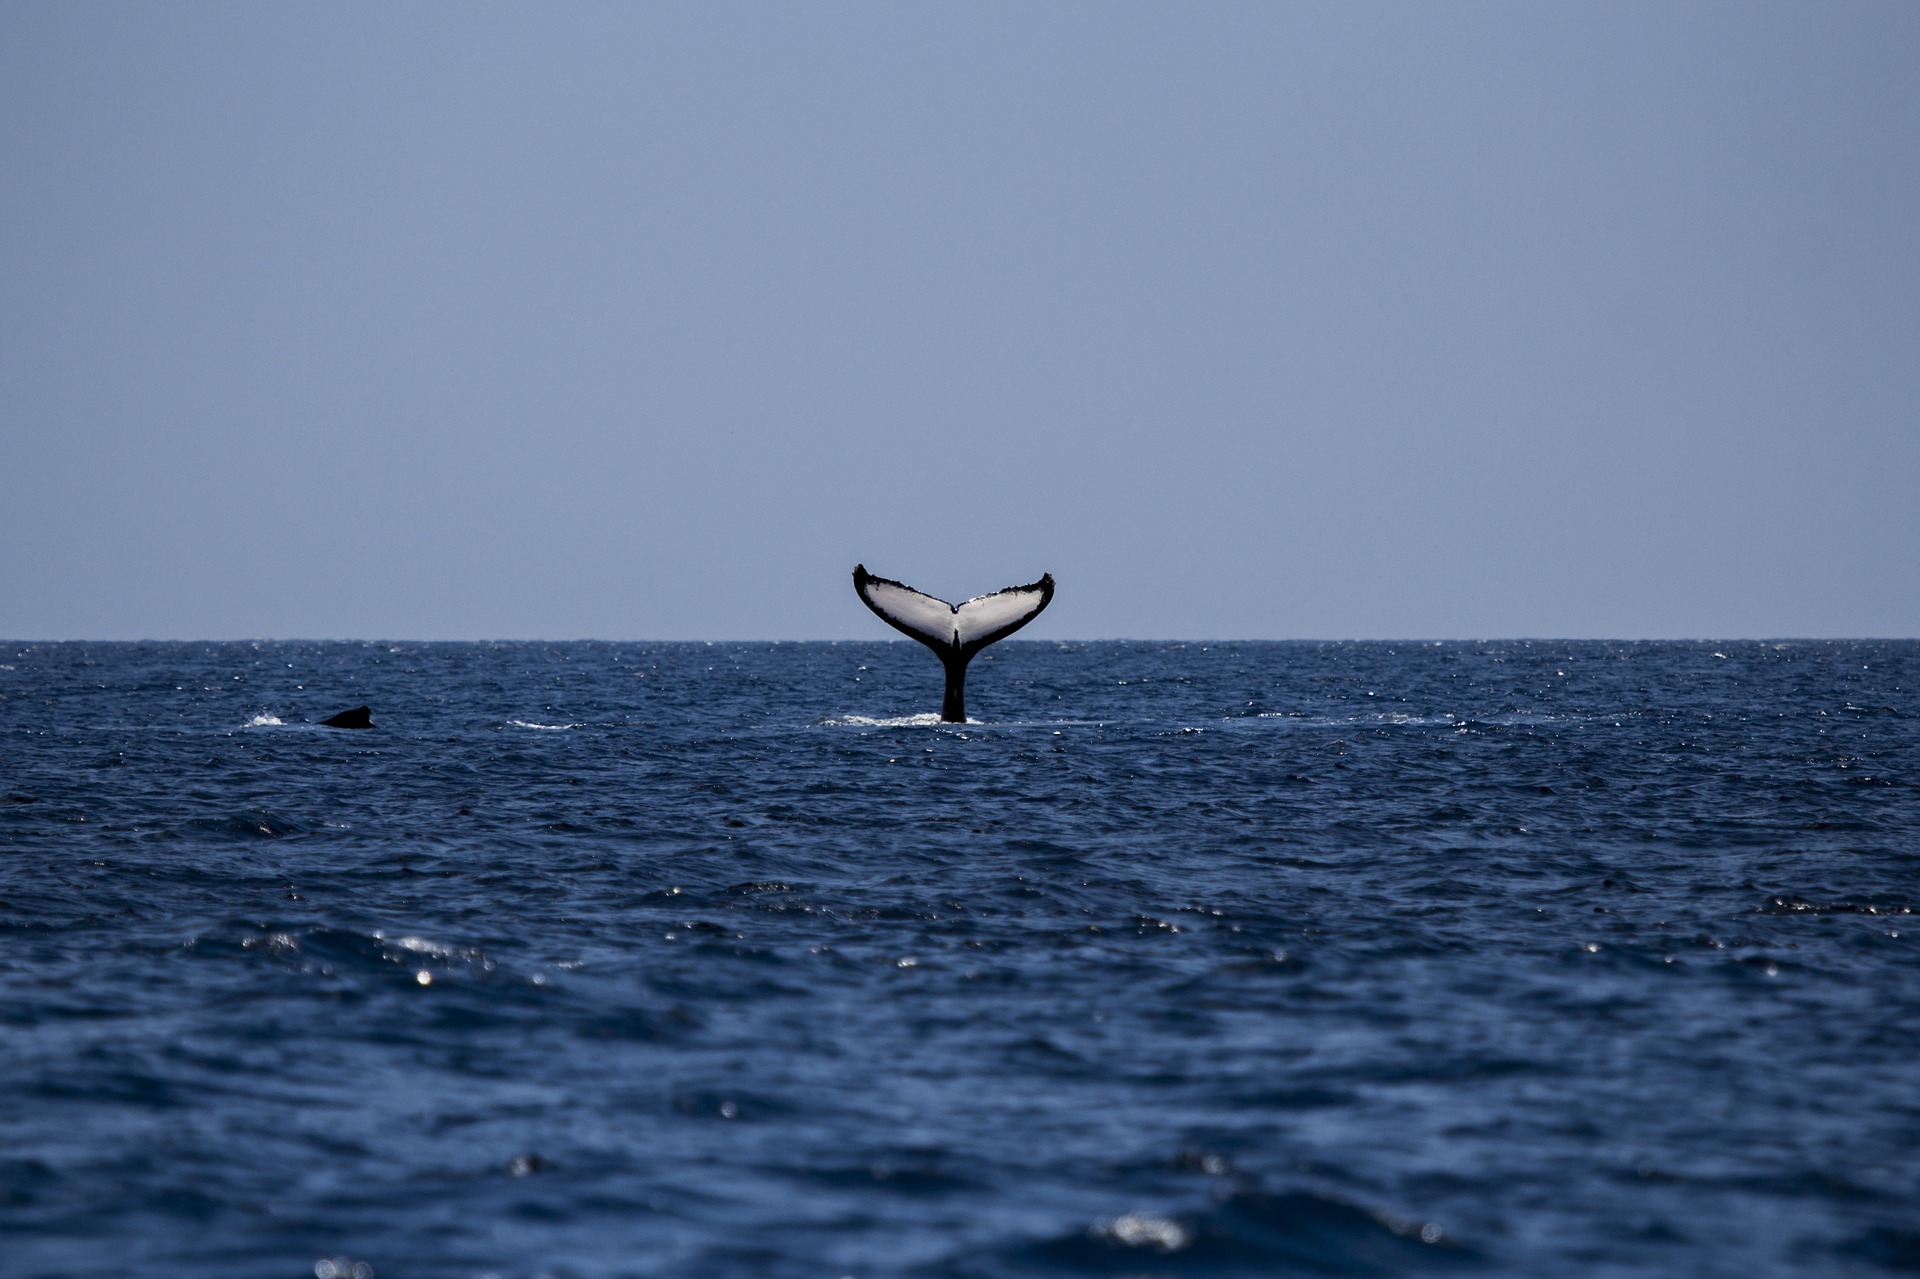 A tail of a whale diving into the blue ocean